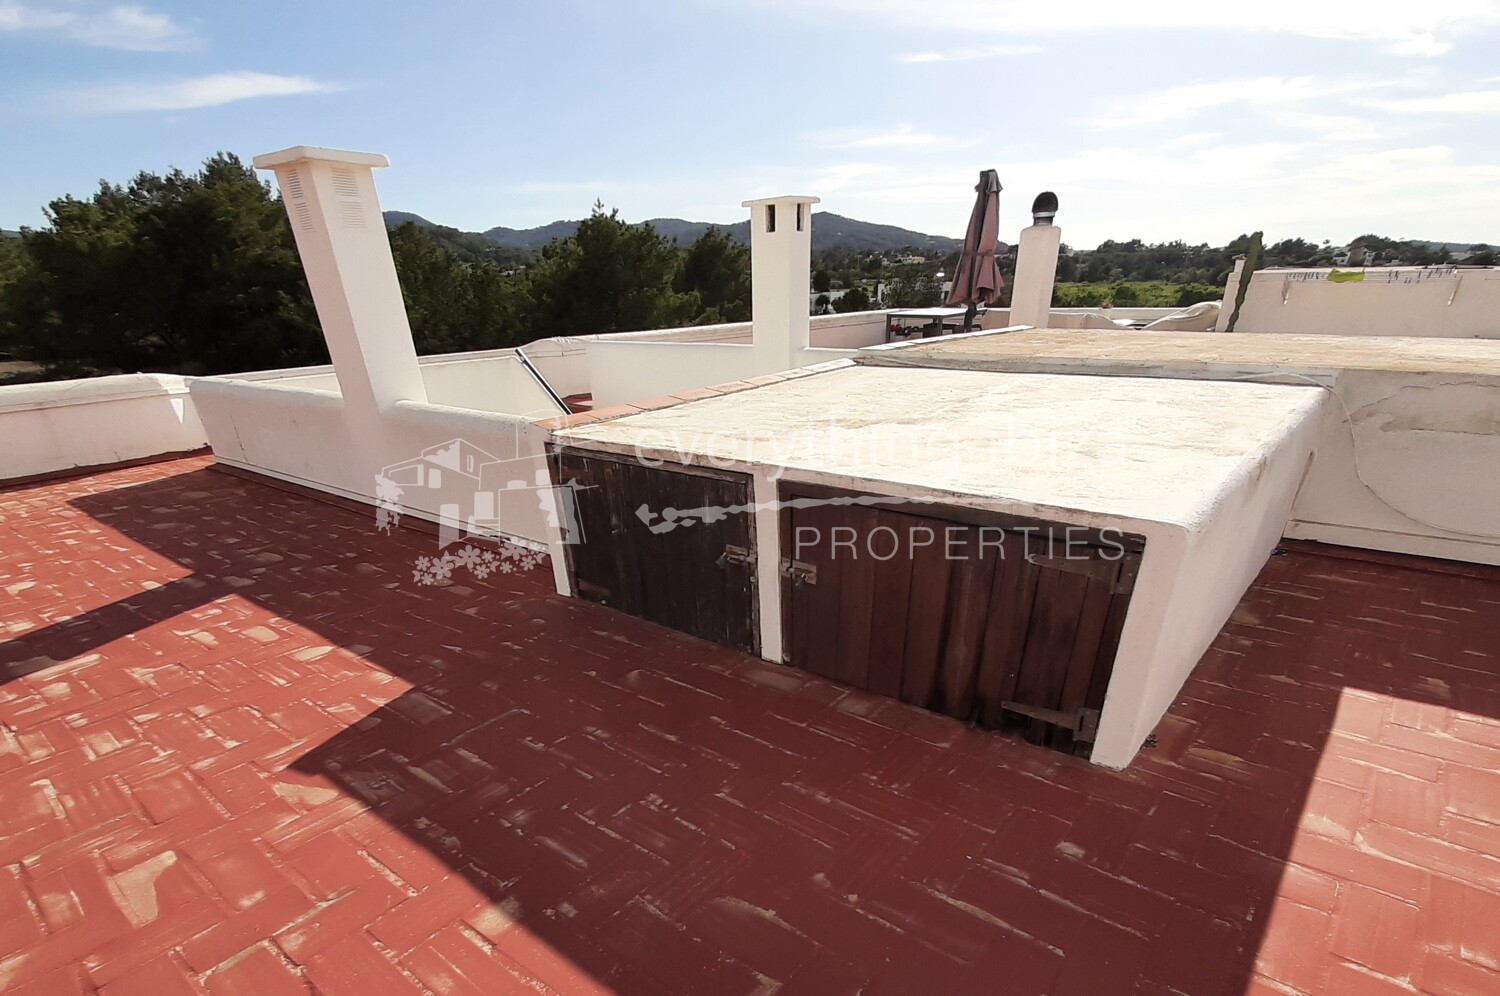 Lovely Top Floor Apartment with Spacious Roof Terrace, ref. 1465, for sale in Ibiza by everything ibiza Properties